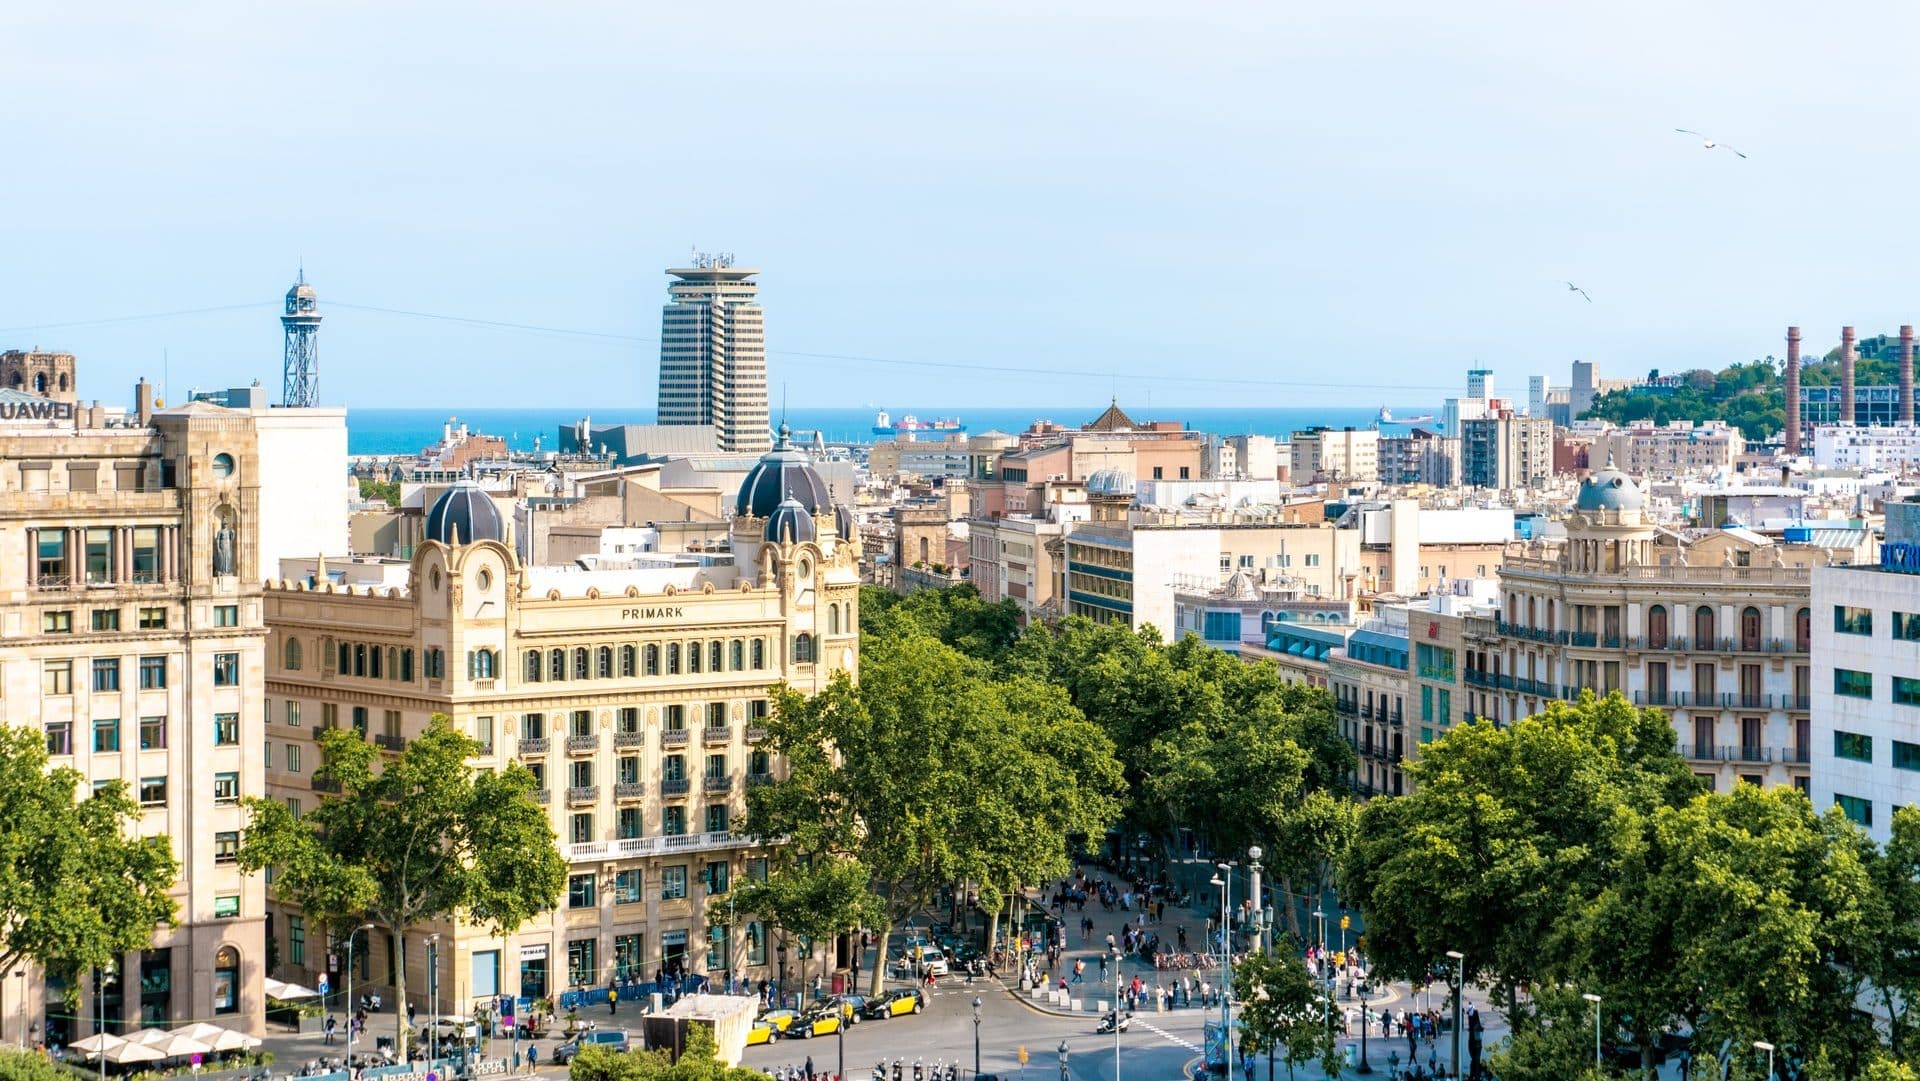 Comprising the medieval districts of Ciutat Vella and the central portion of l'Eixample, Barcelona's City Centre is home to most of the attractions, museums, nightlife areas and hotels in the Catalan capital